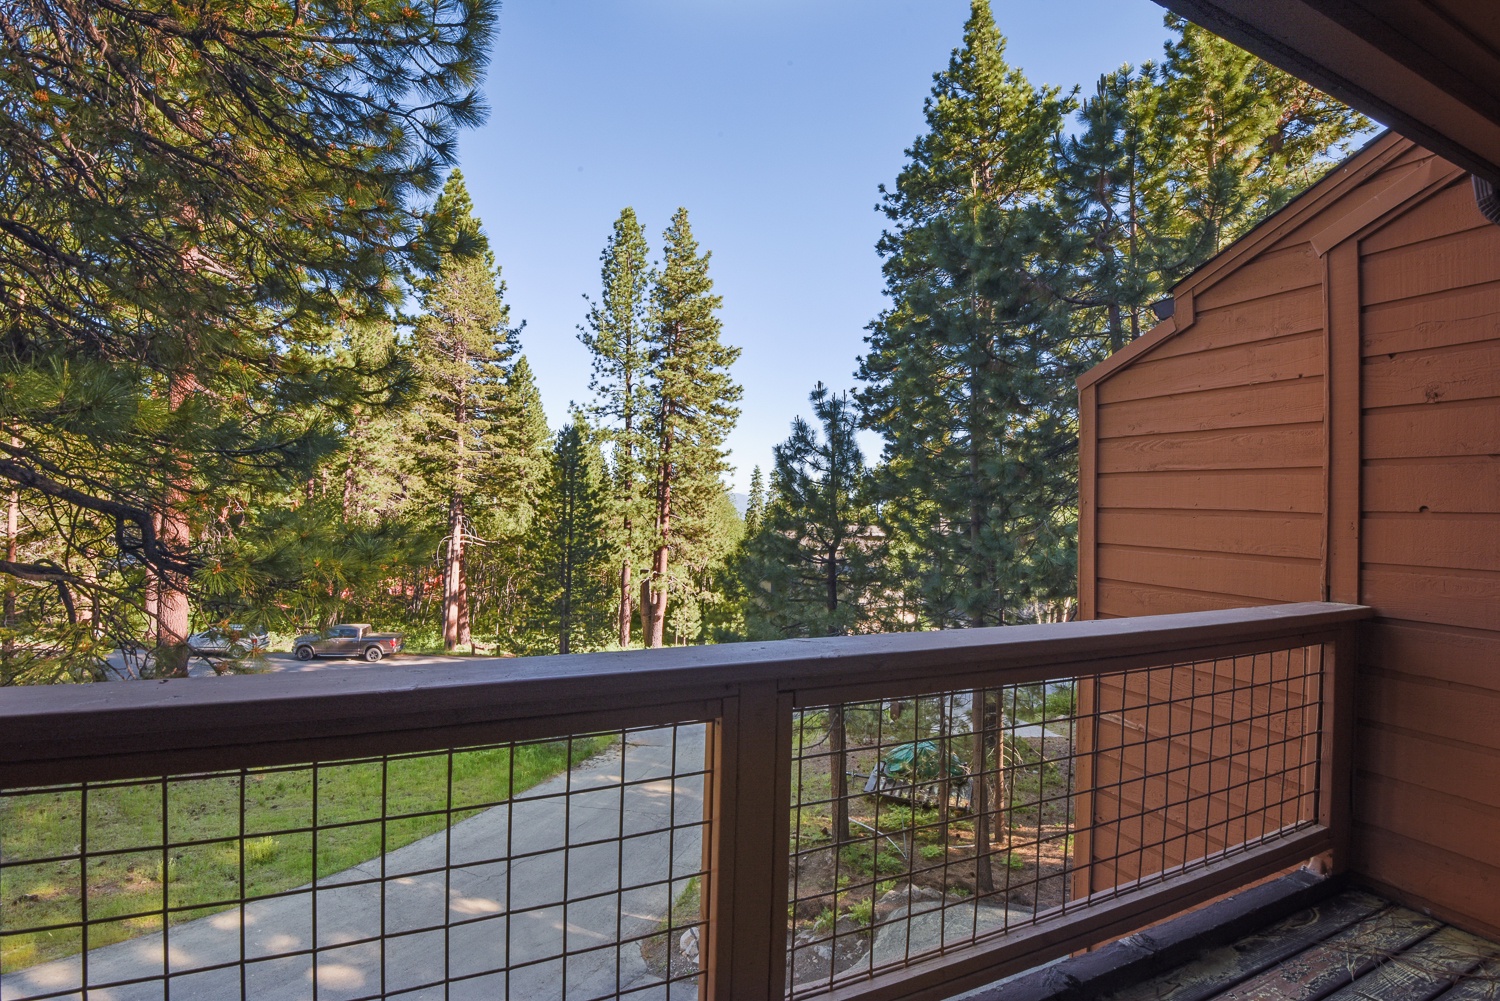 Take in the gorgeous nature views from both of this home’s balconies